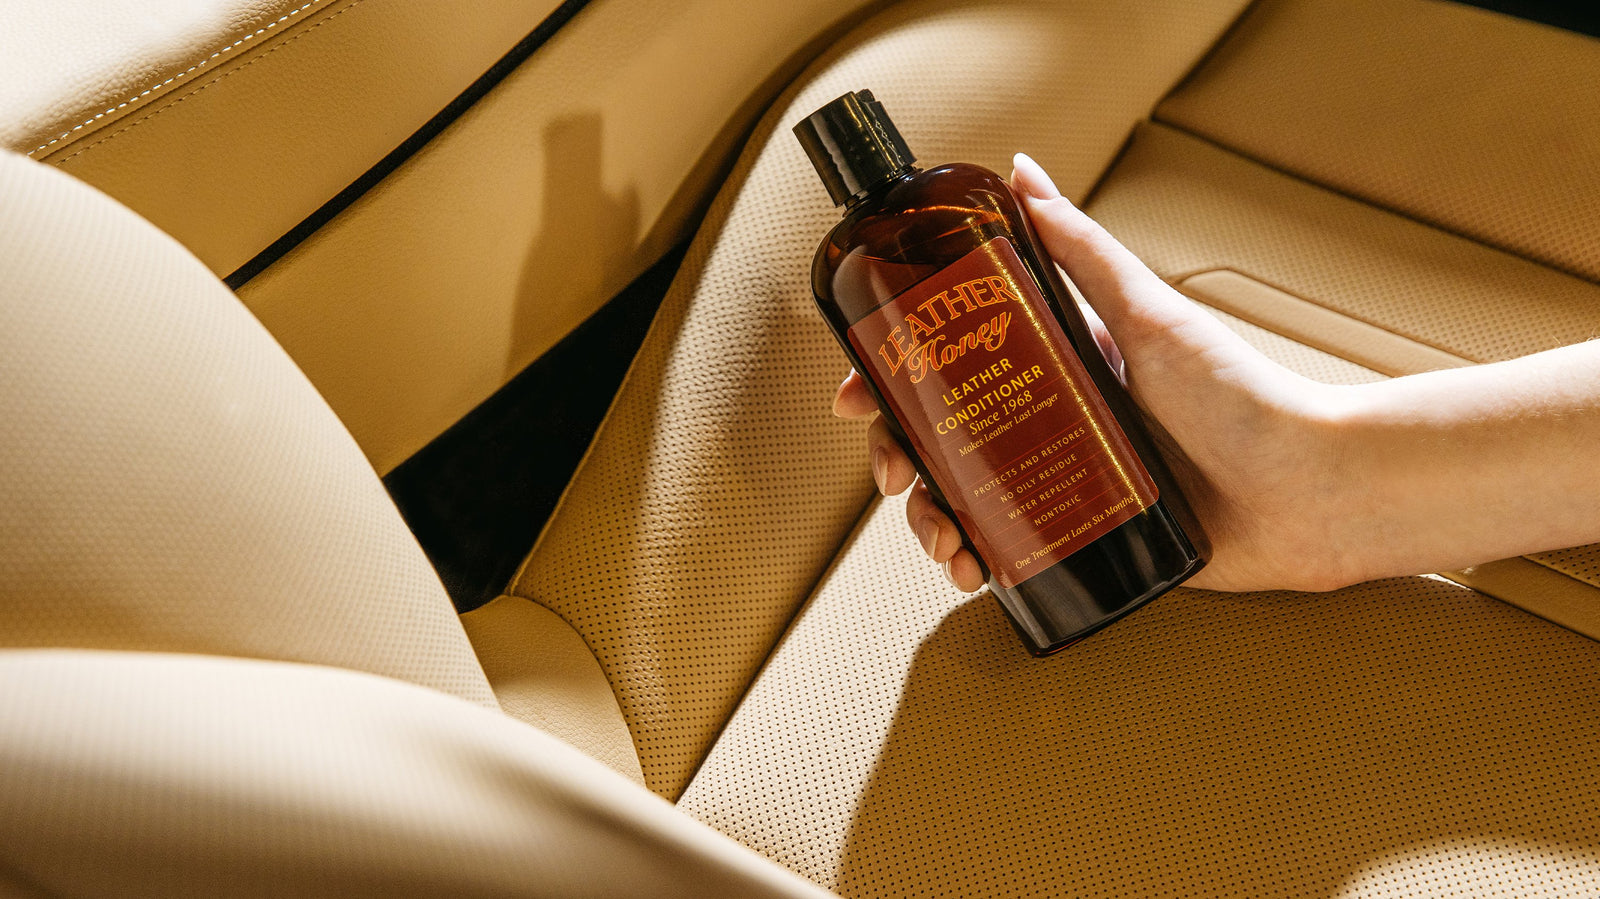 Leather Honey Leather Cleaner - Quality Leather Care, Made in The USA Since  1968 - Leather Cleaner for Auto Interiors, Furniture, Shoes, Bags